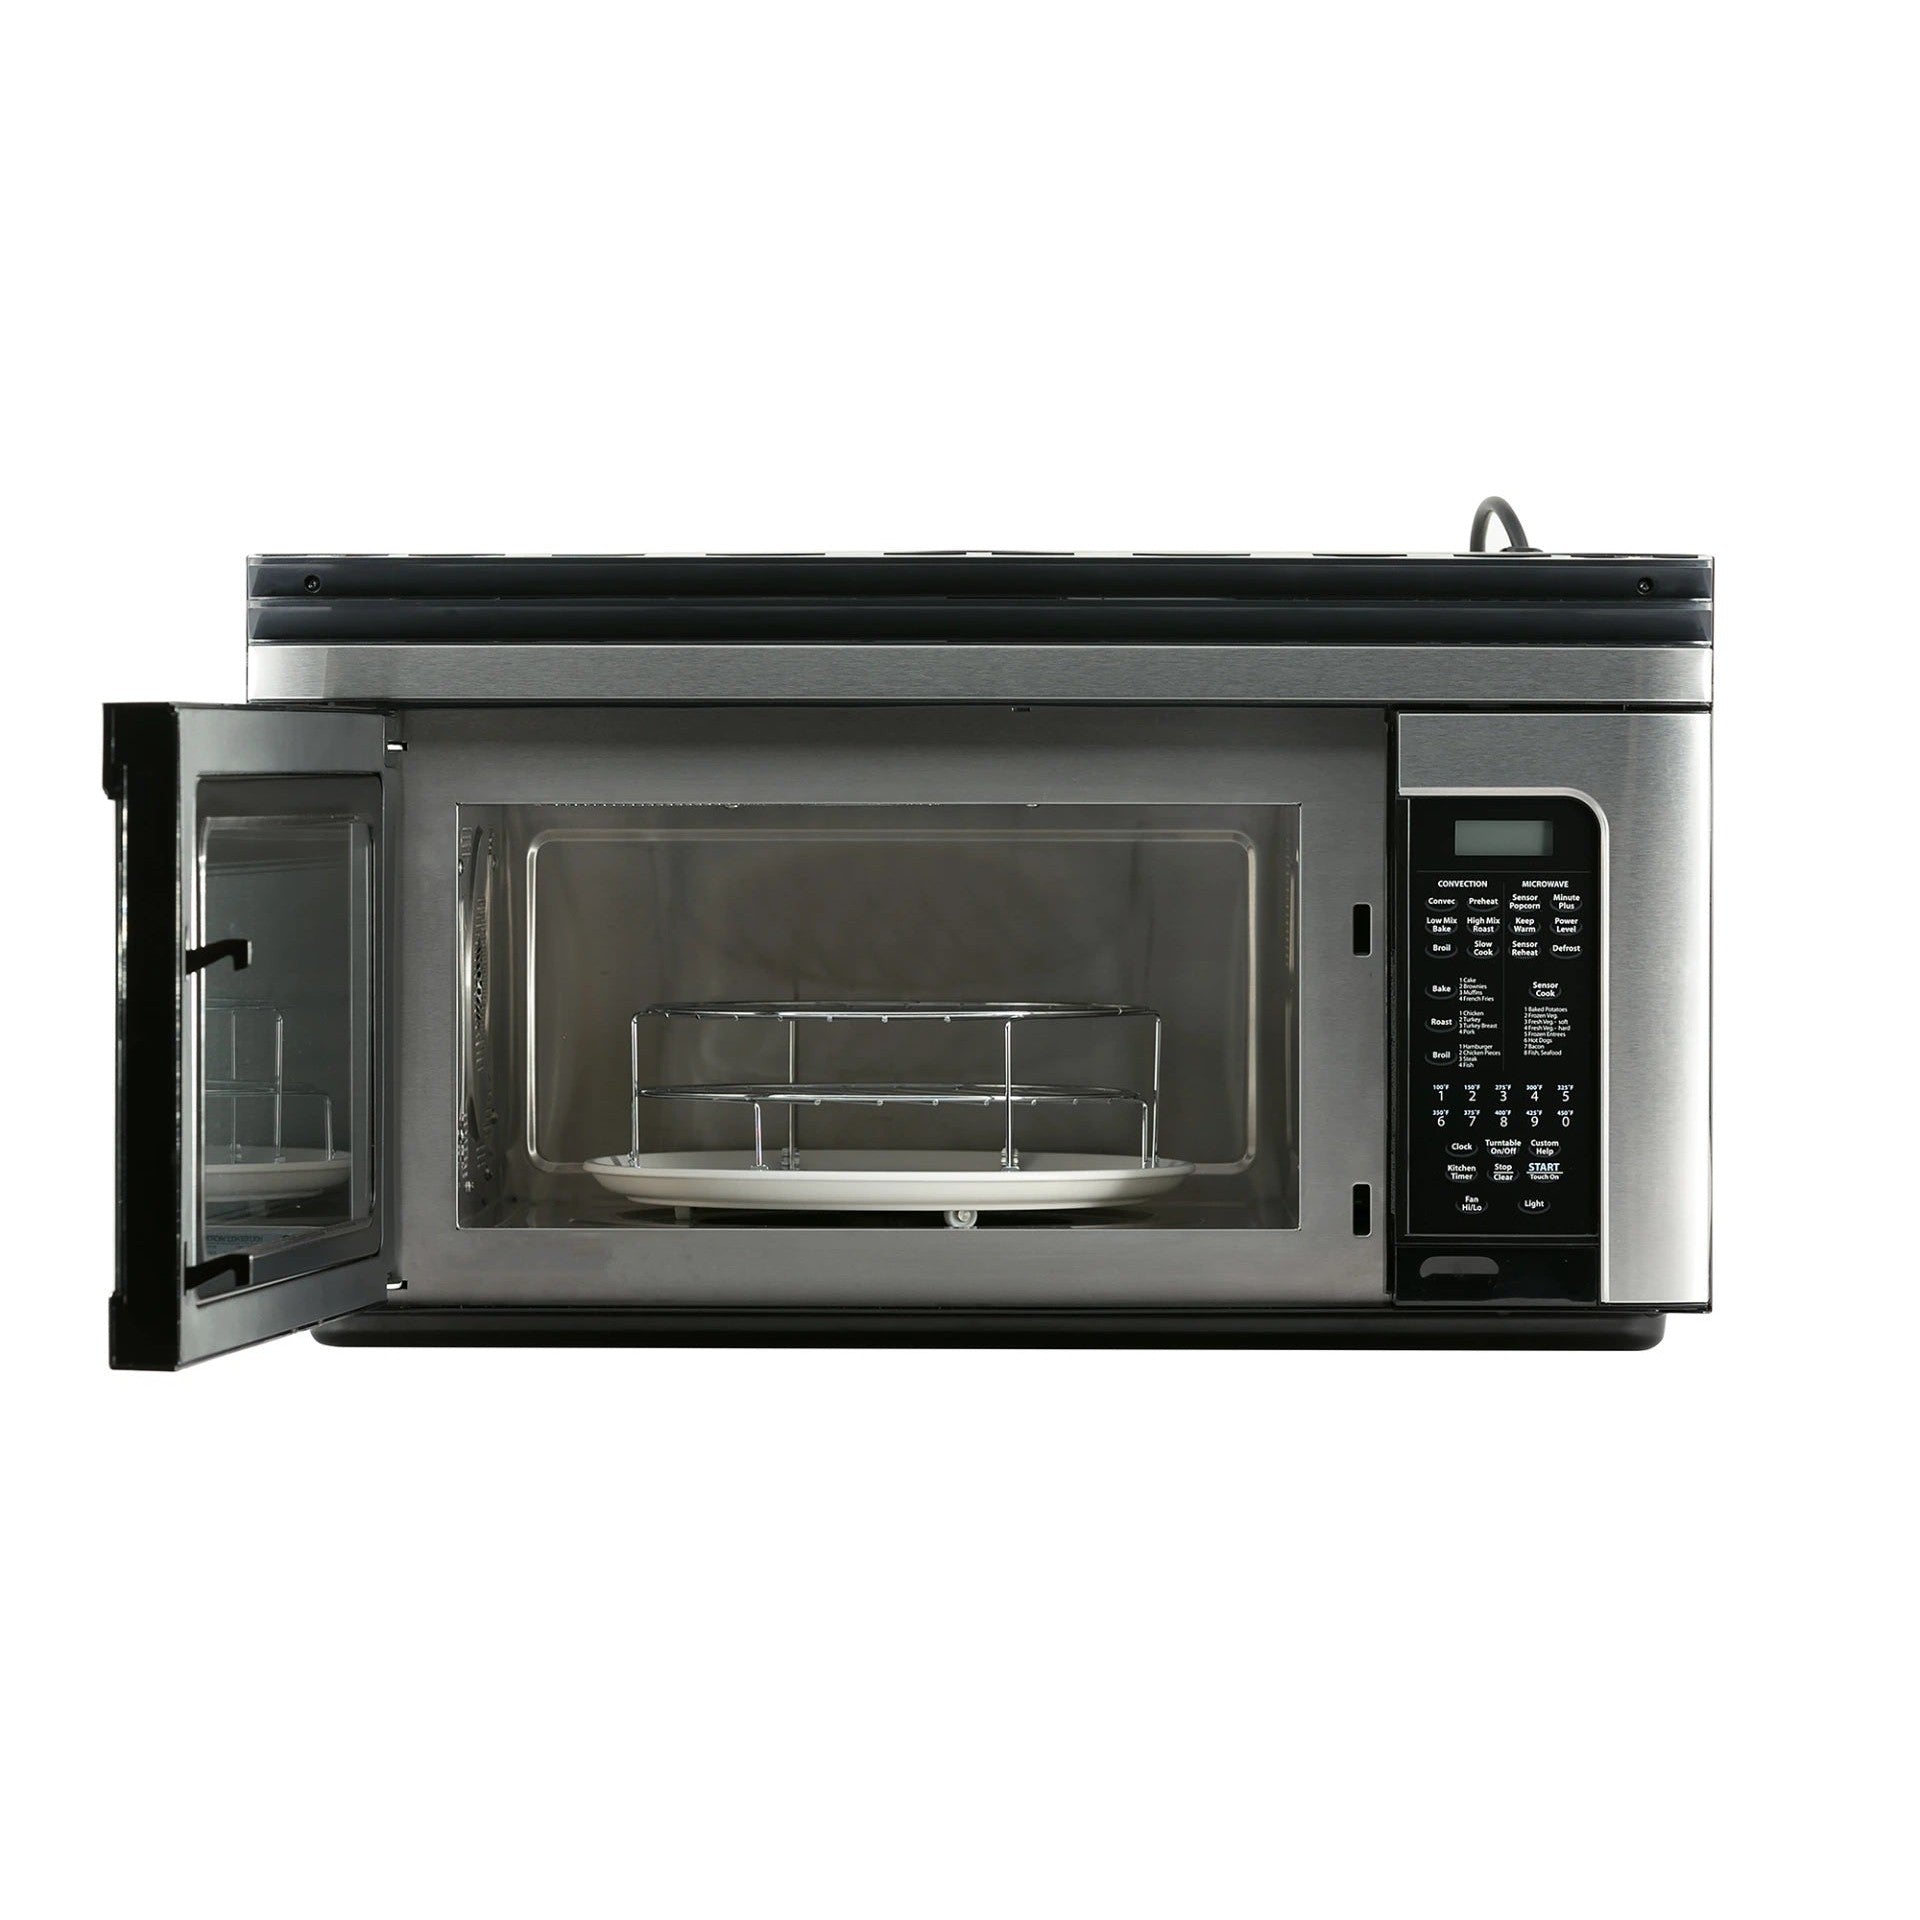 Sharp Carousel 30" 1.1 CU. Ft. 850W Stainless Steel Convection Over-The-Range Auto-Touch Control Panel Microwave Oven